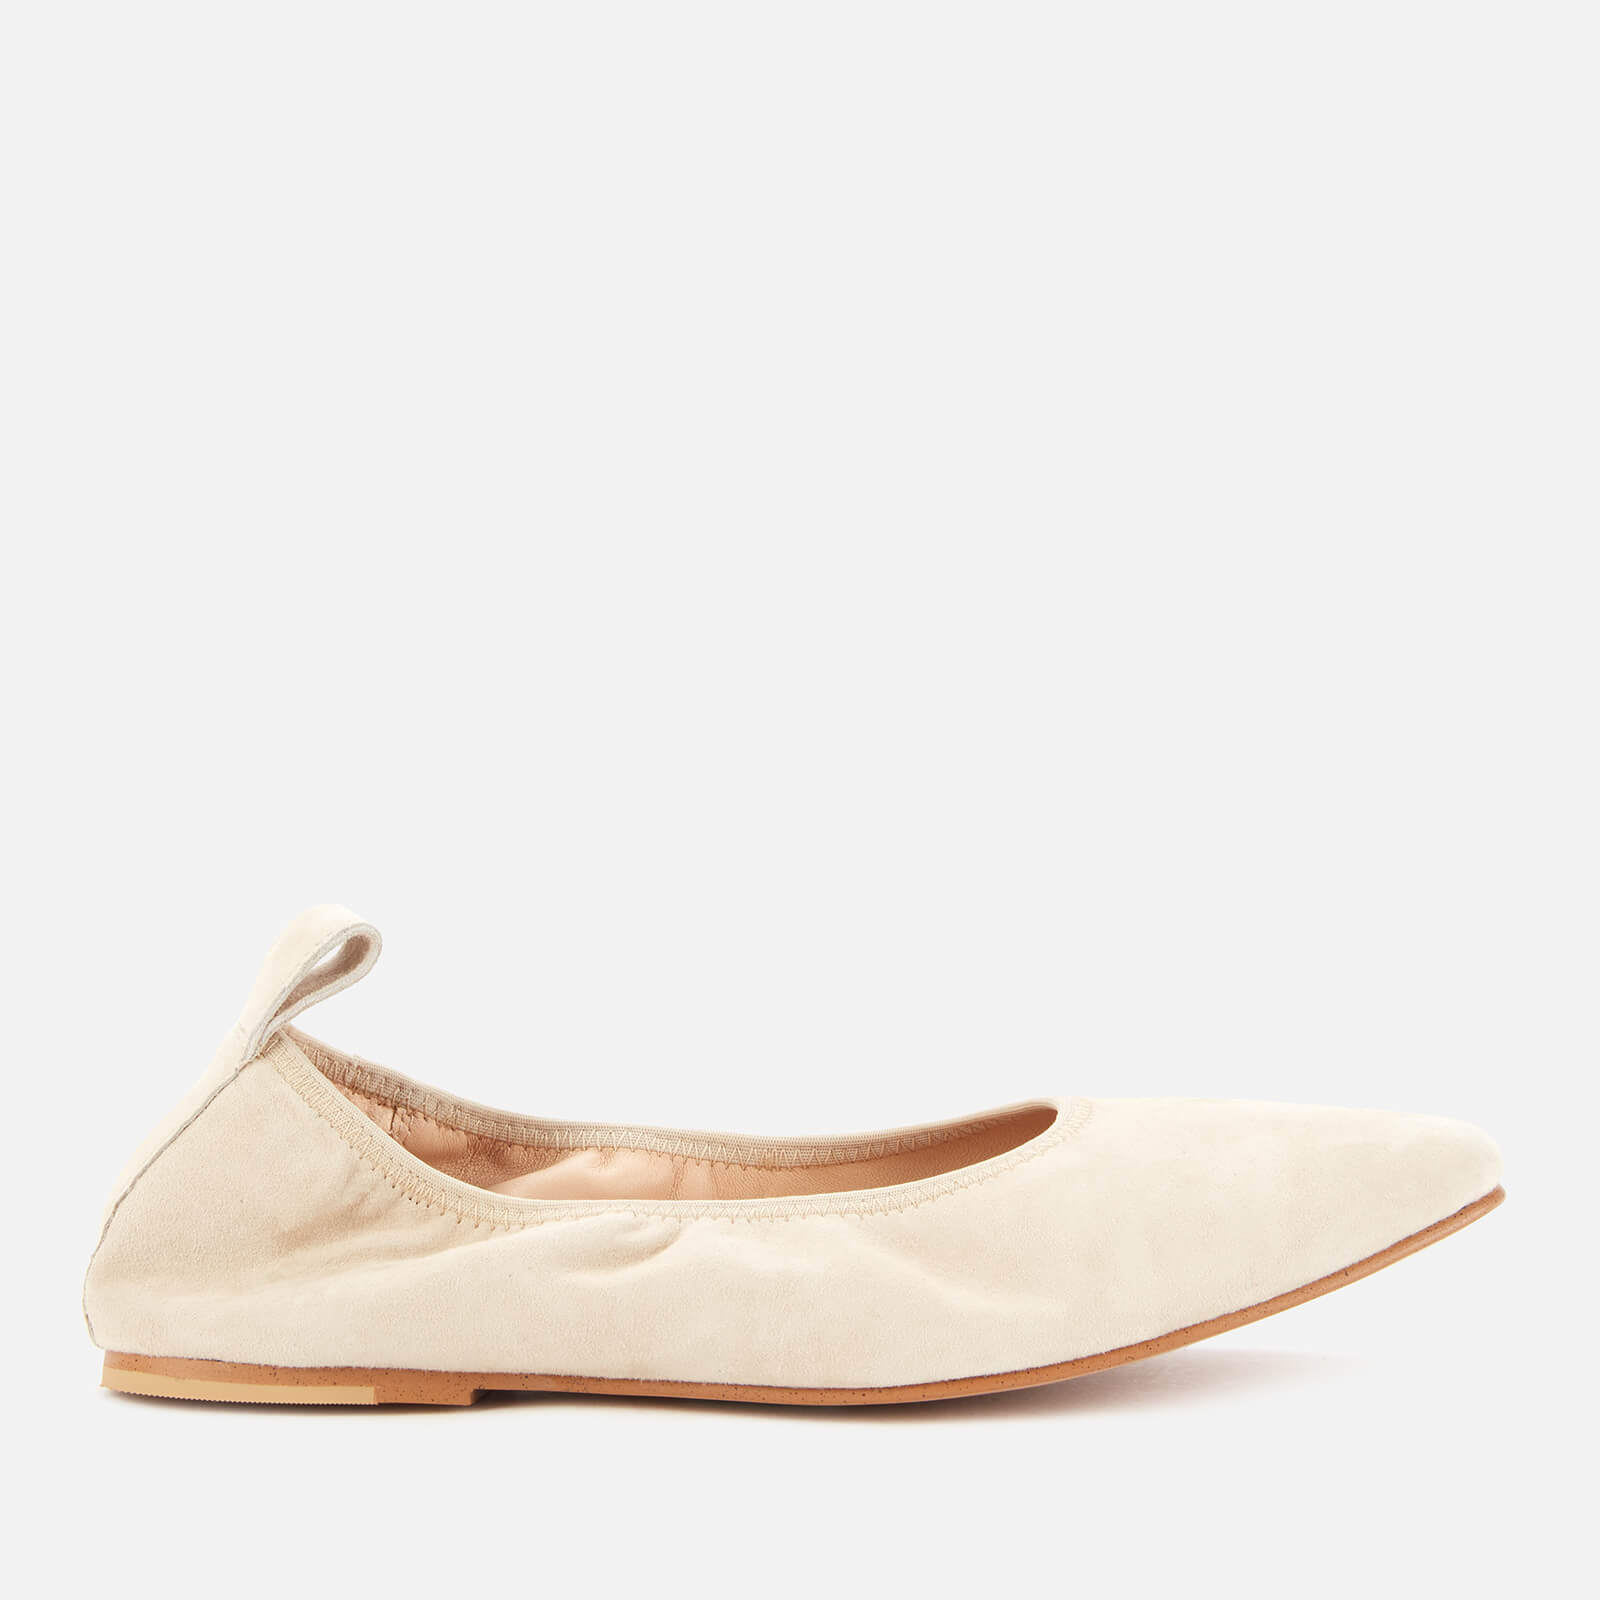 Clarks Women's Pure Leather Ballet Flats - Taupe - UK 3